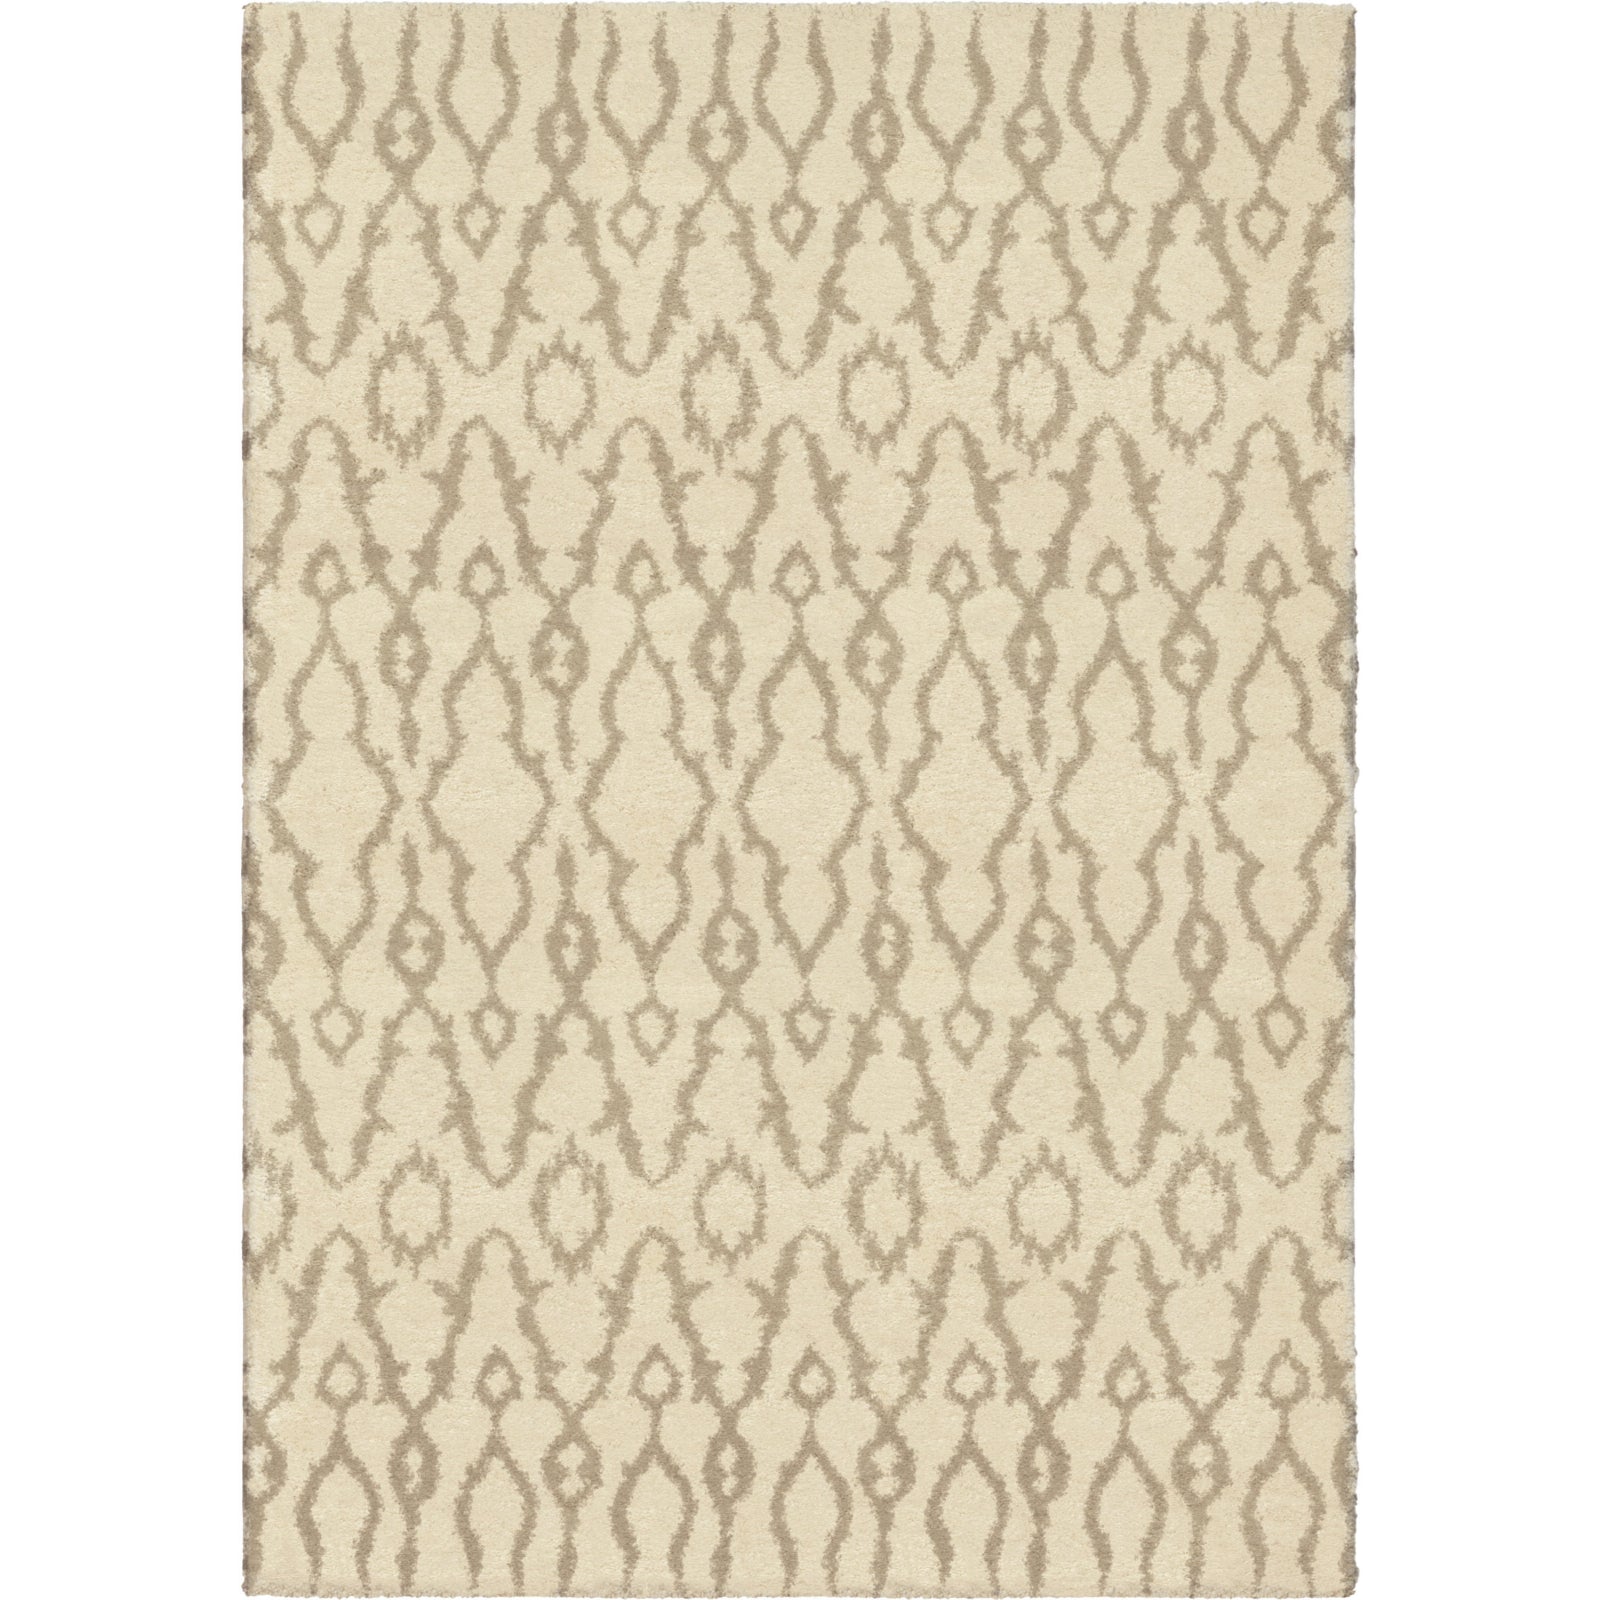 Orian Rugs Poise Mable Ivory Area Rug main image